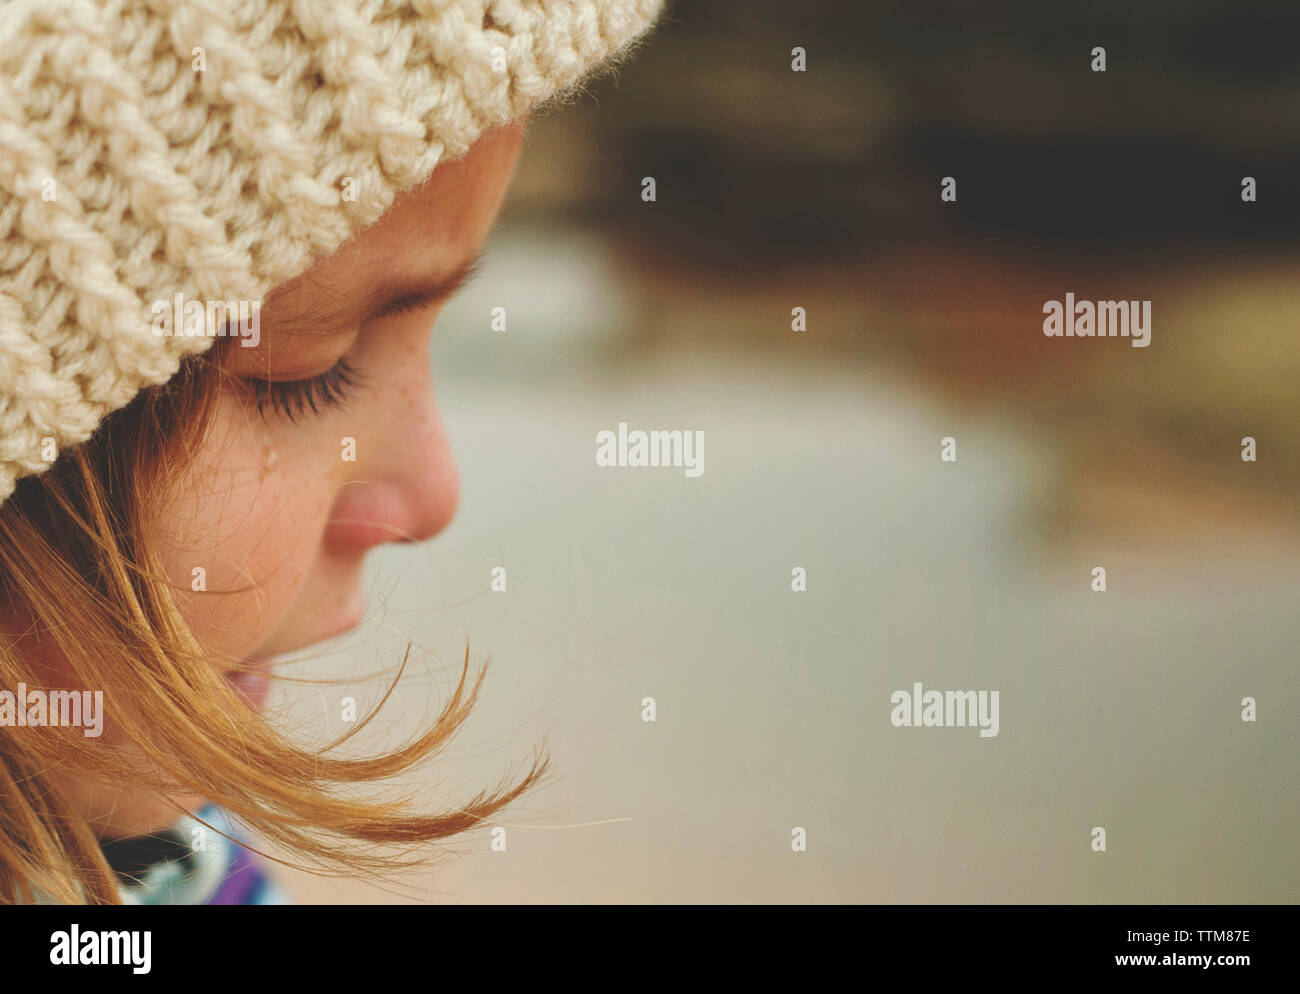 Close-up of sad girl wearing knit hat while crying Stock Photo